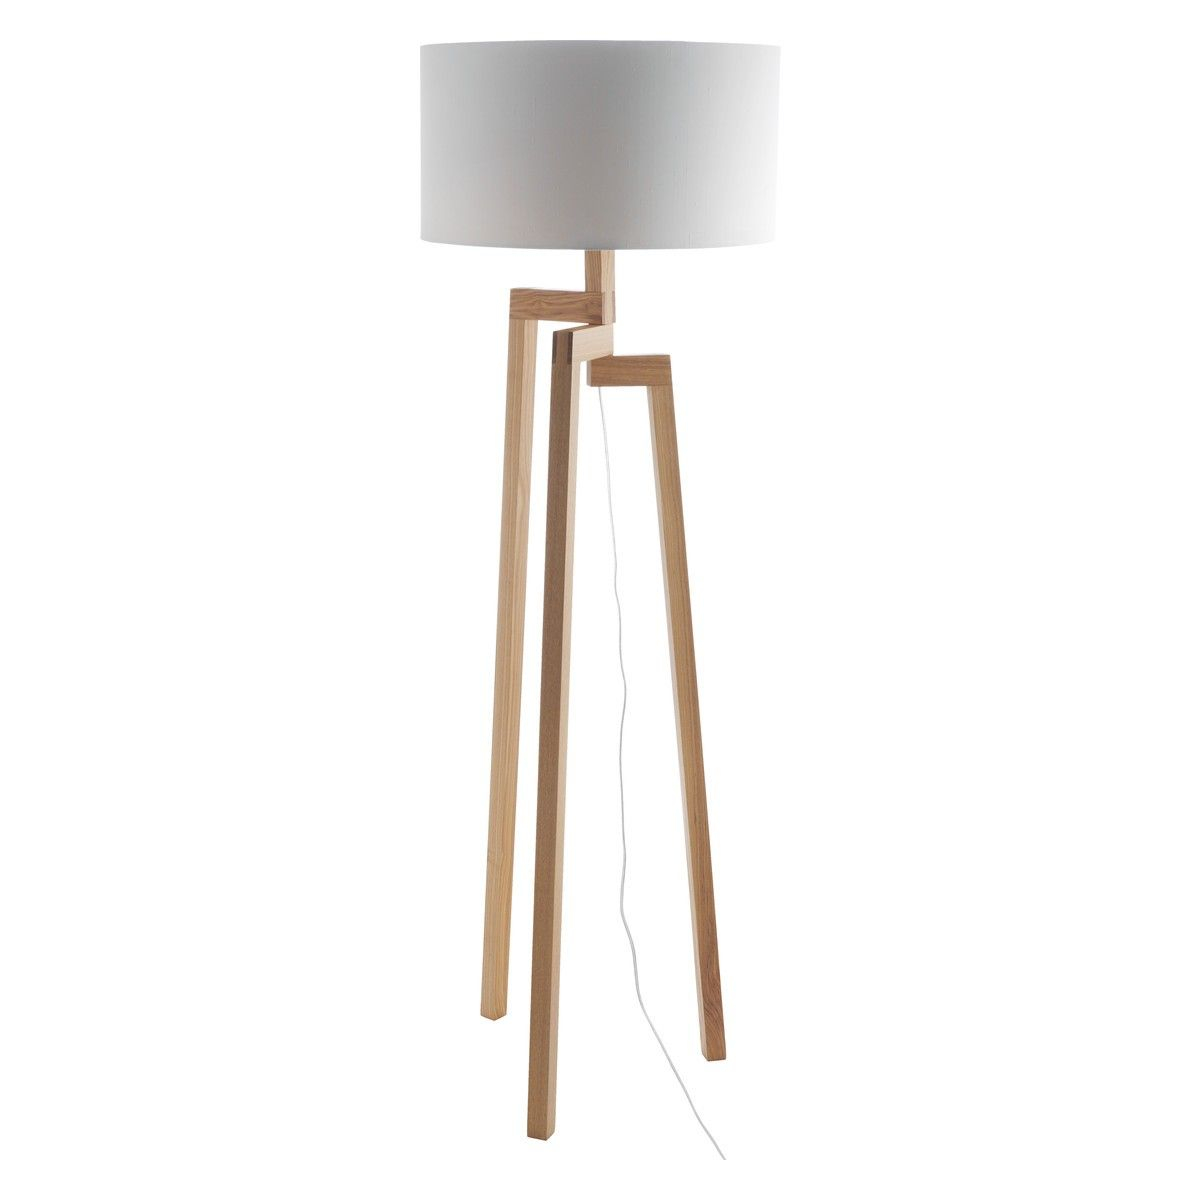 Dylan Base Ash Wooden Floor Lamp In 2019 Wooden Floor pertaining to size 1200 X 1200